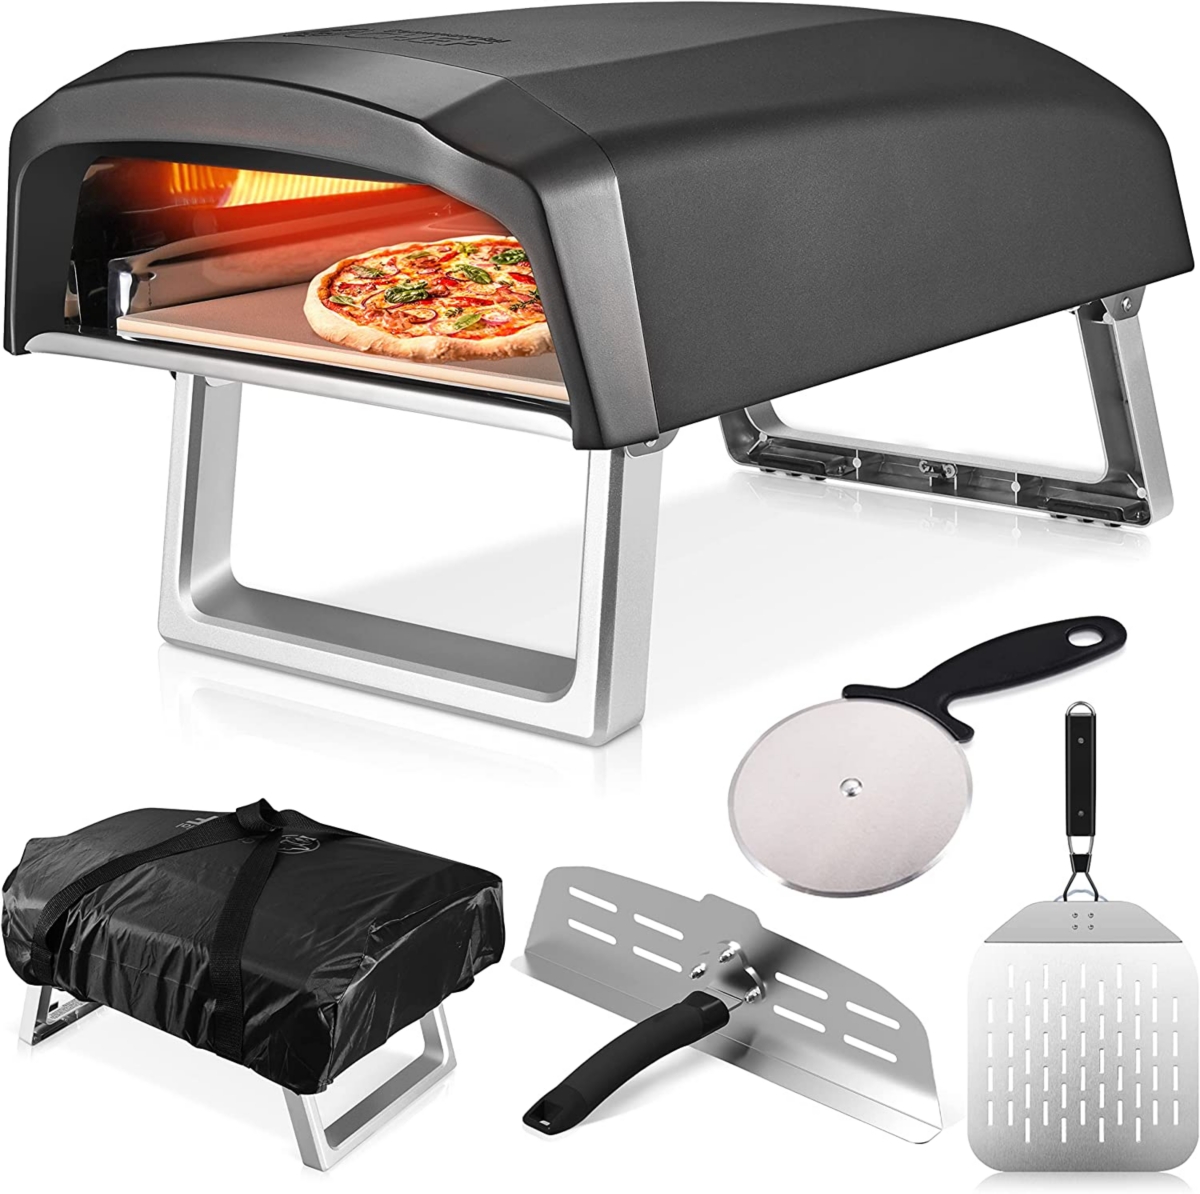 Propane Gas Pizza Oven with Dual Burner System includes Baffle Door, Peel, 12" Stone, Cutter, and Cover